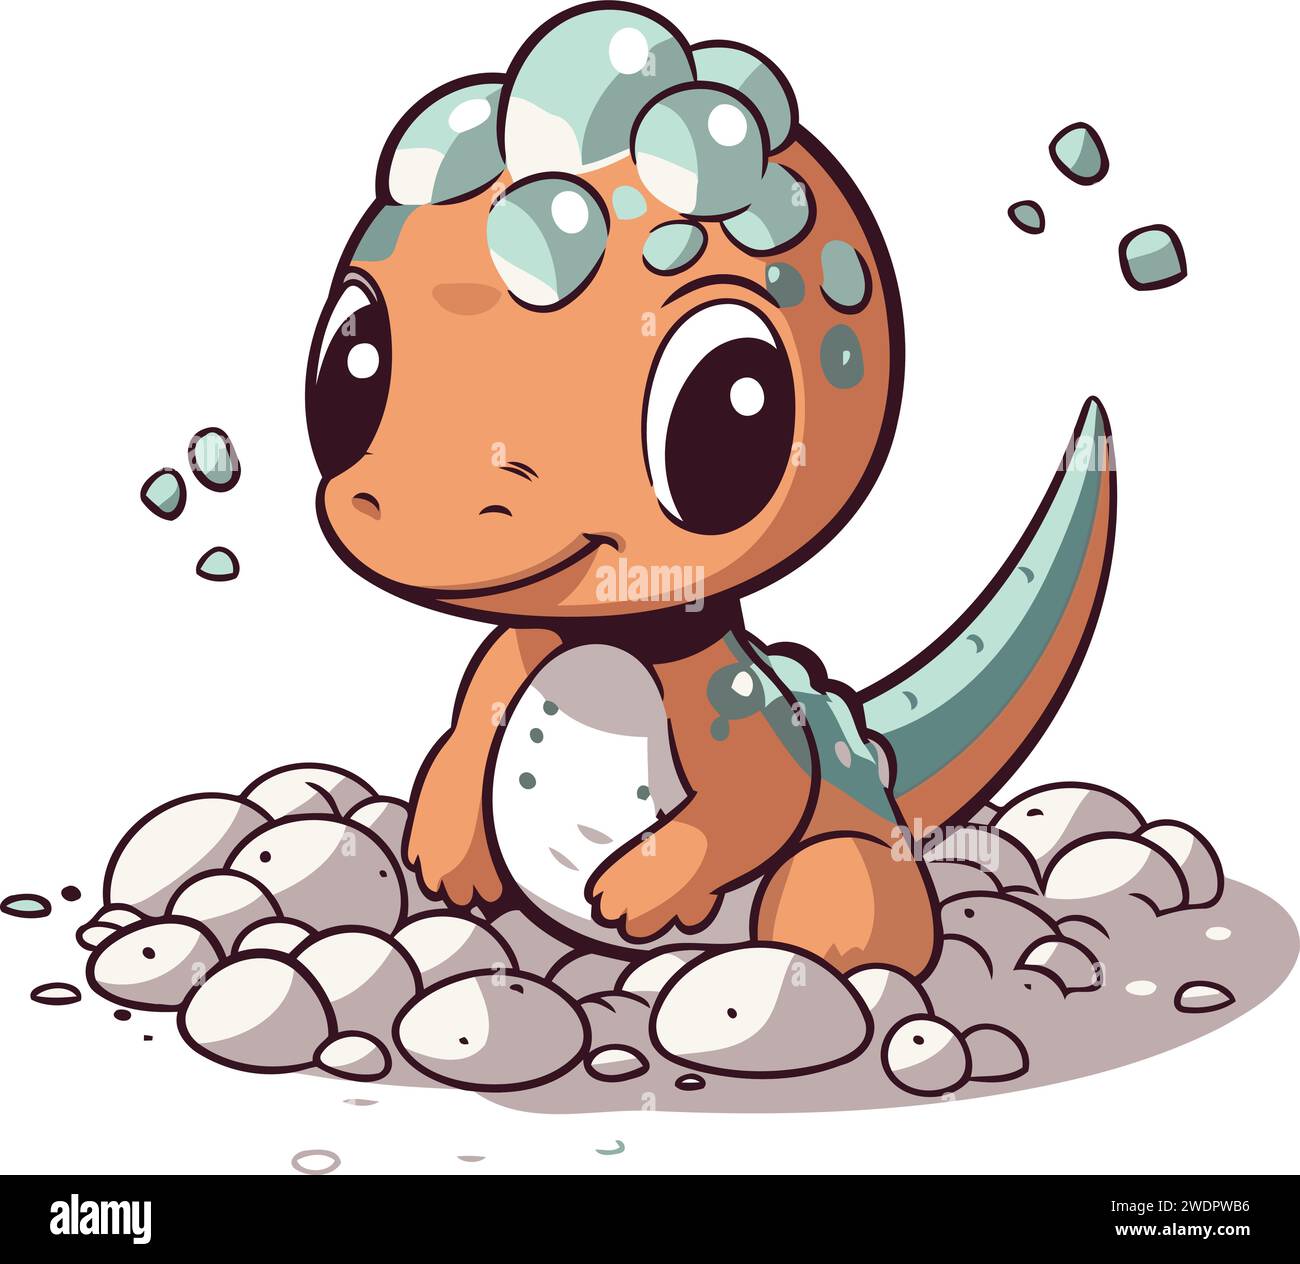 Cute cartoon dinosaur in the mud. Vector illustration isolated on white background. Stock Vector